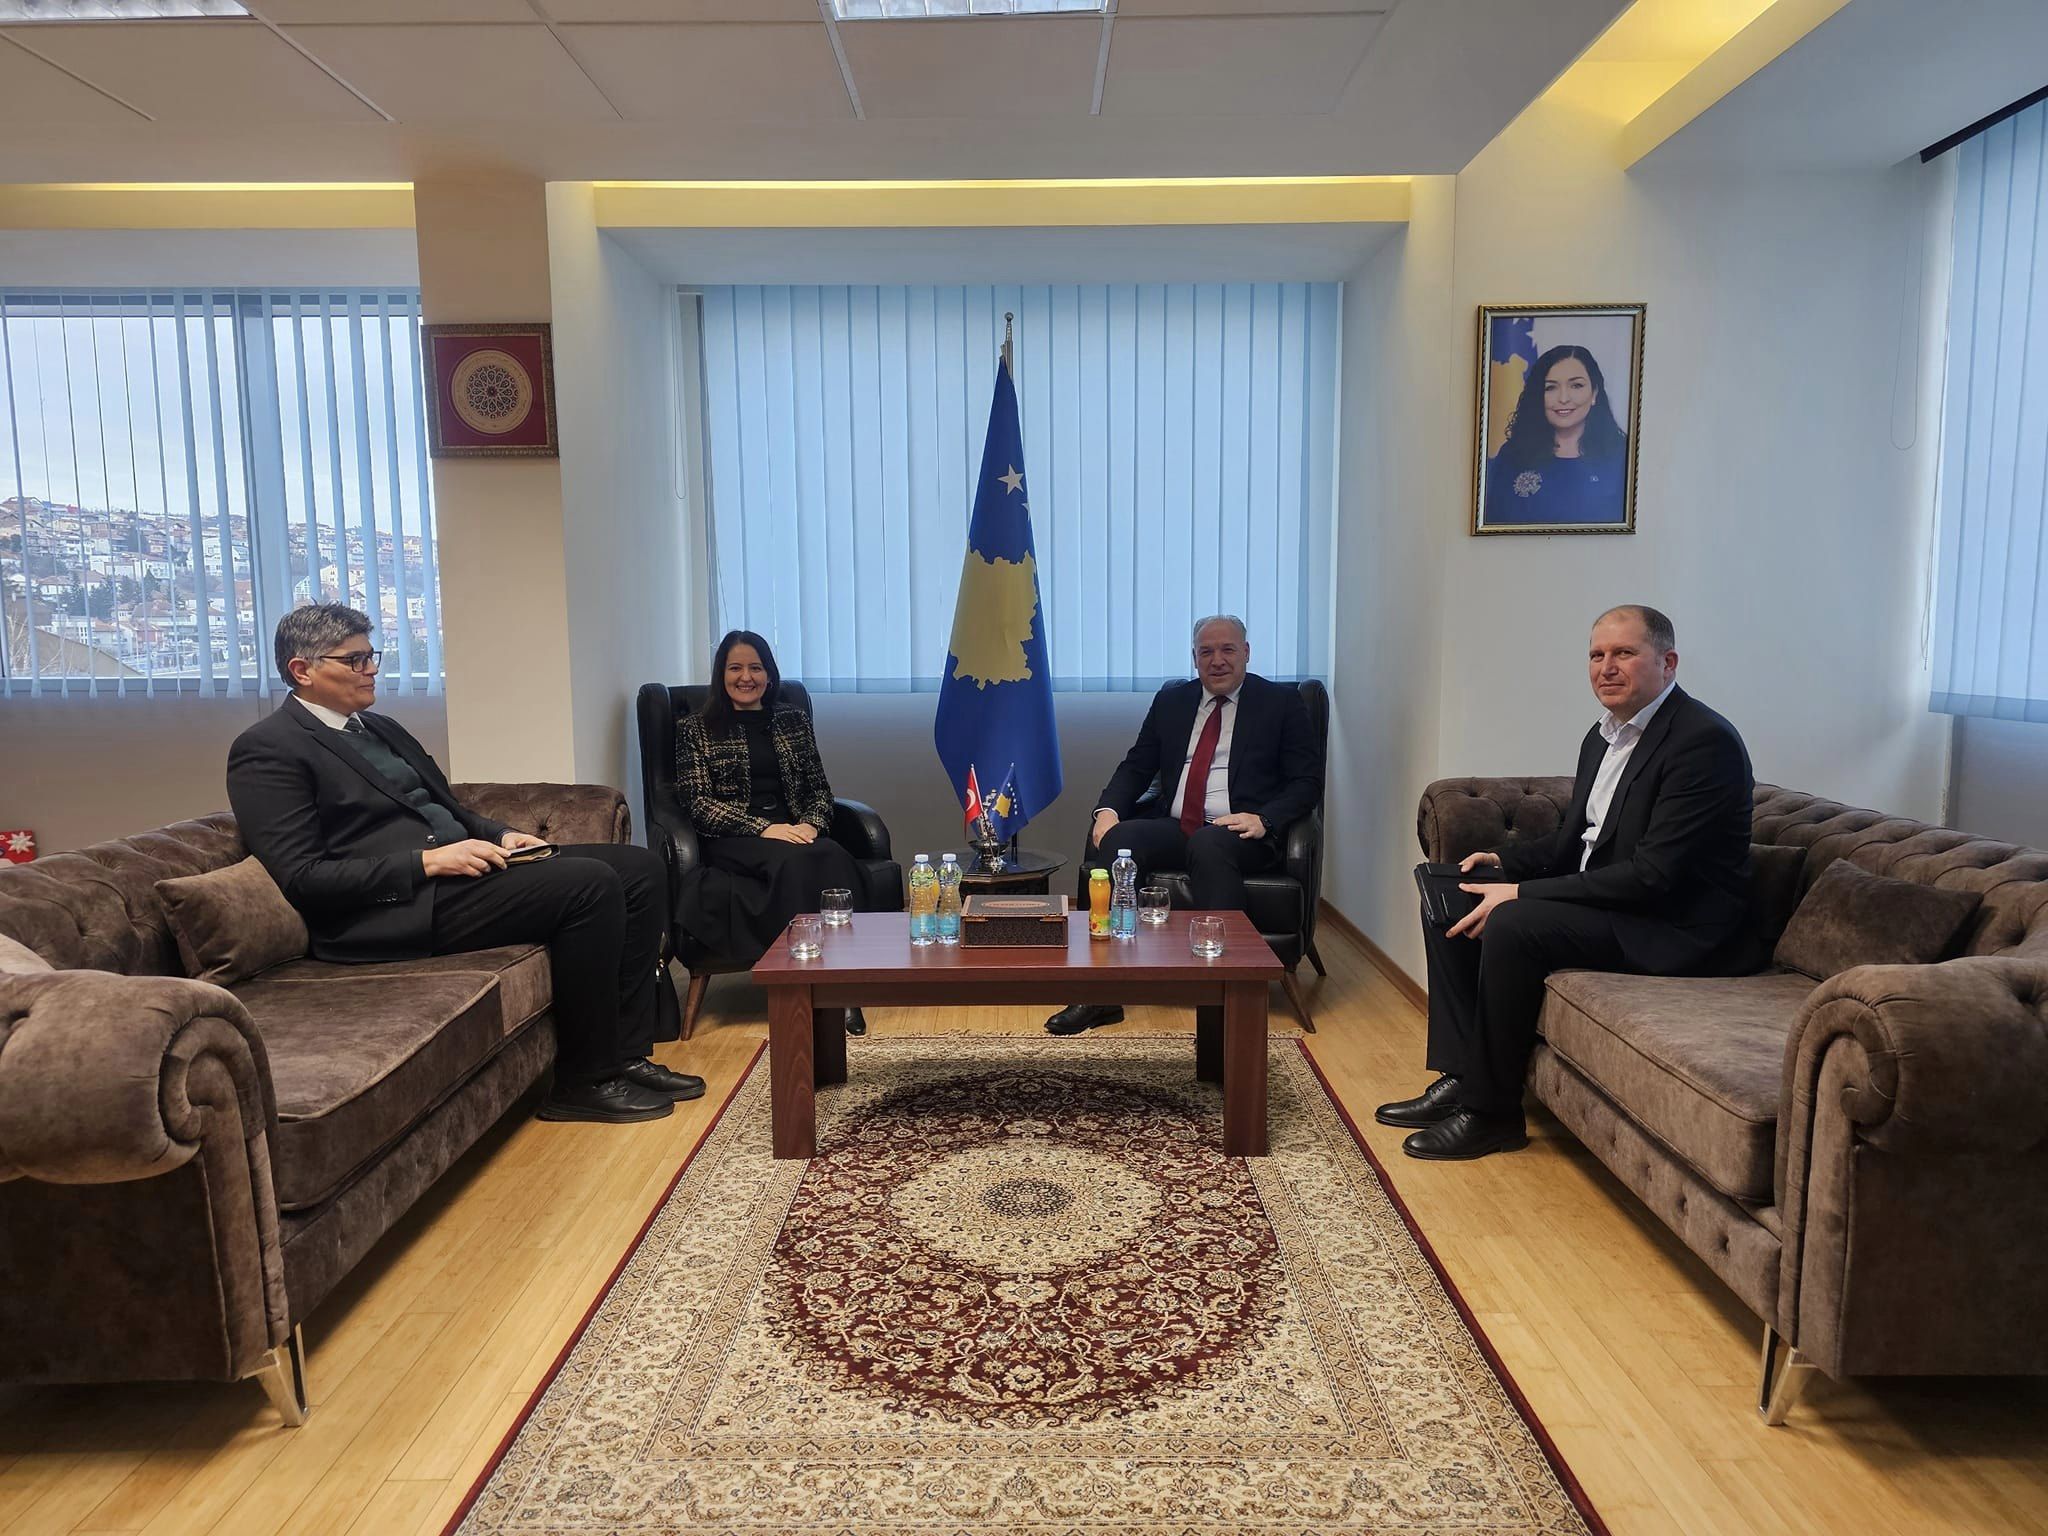 The Minister of MRD, Mr. Fikrim Damka, received the Coordinator of the Turkish Cooperation and Coordination Agency, TIKA, in Pristina, Mrs. Fulya Aslan.